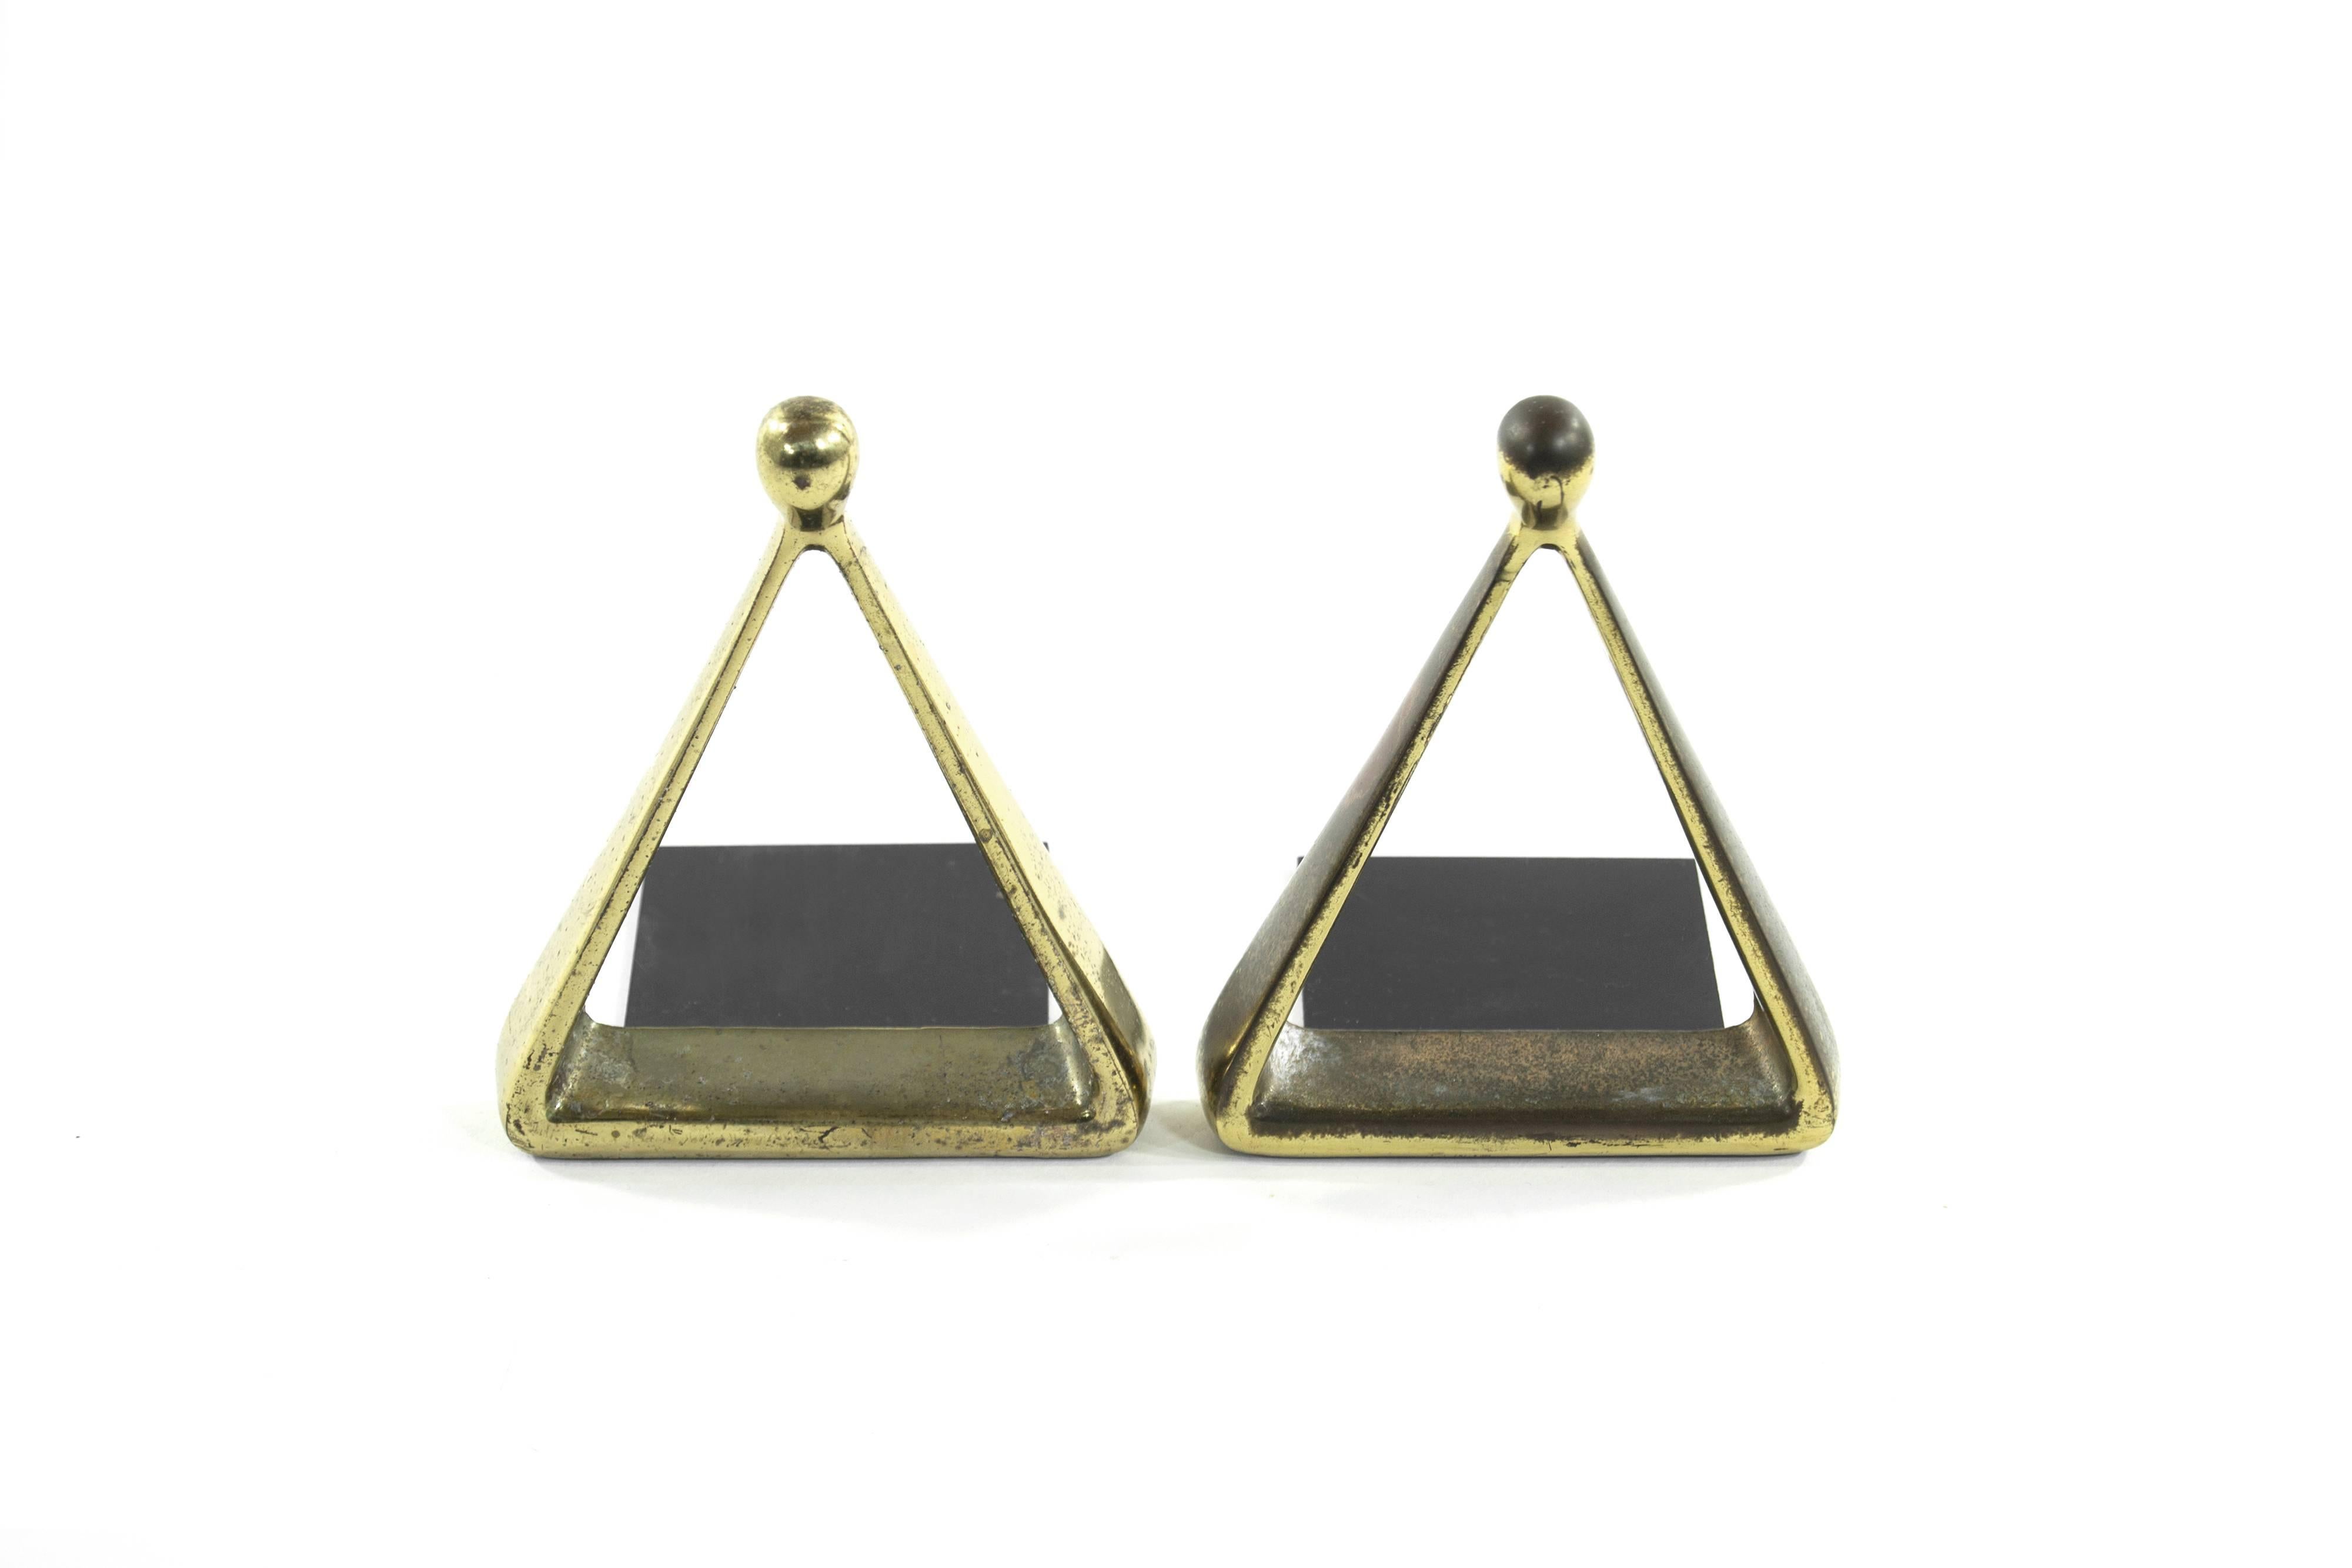 Mid-Century Modern Pair of Triangular Bookends by Ben Seibel for Jenfred Ware, 1950s